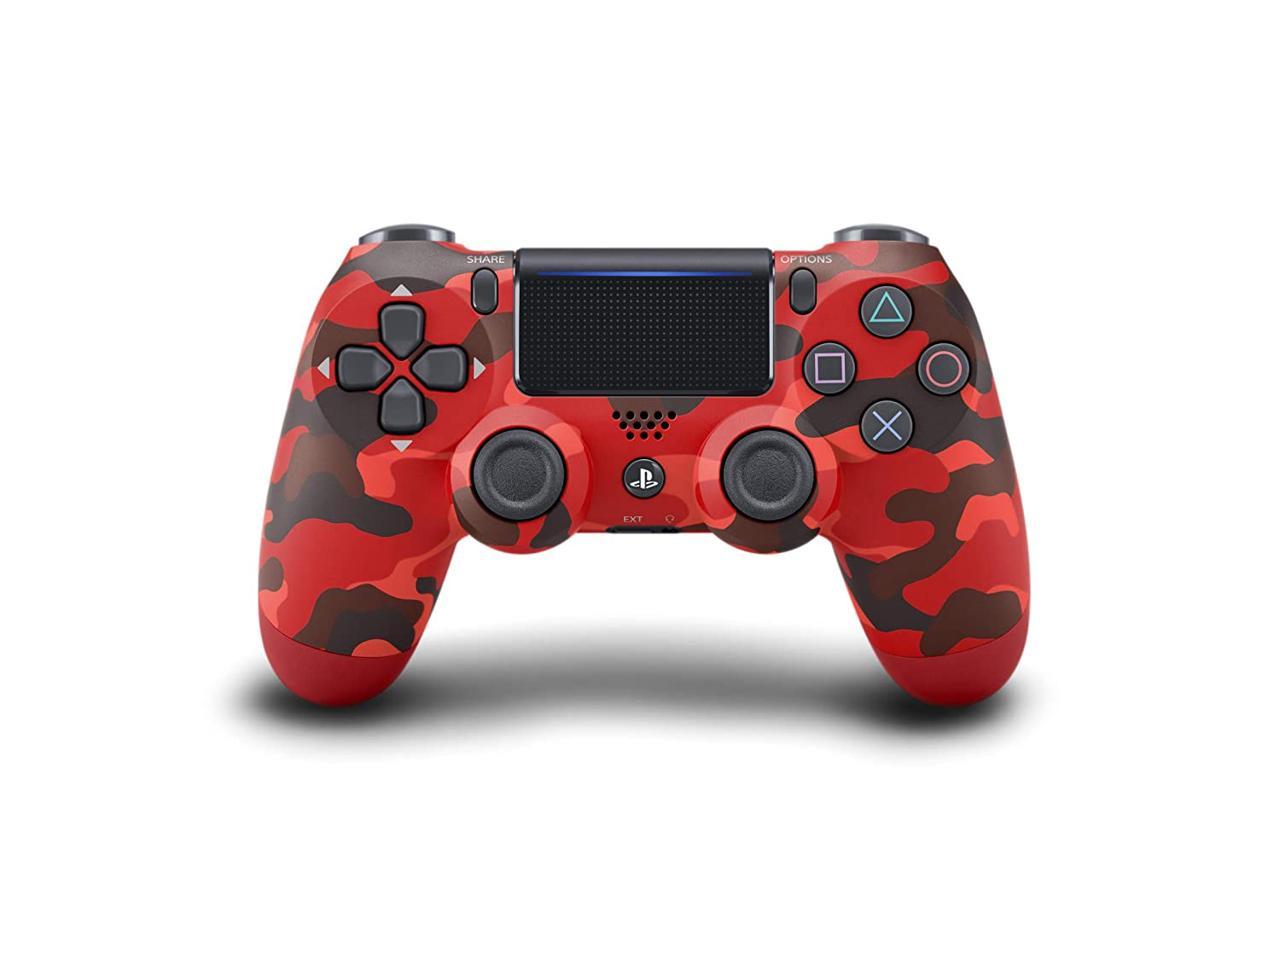 PS4 Wireless Controller Game Pad for SONY PlayStation 4 Dualshock - Red Camouflage,Hot PS4 Wireless Controller Game Pad for SONY PlayStation Dualshock 4 Camouflage